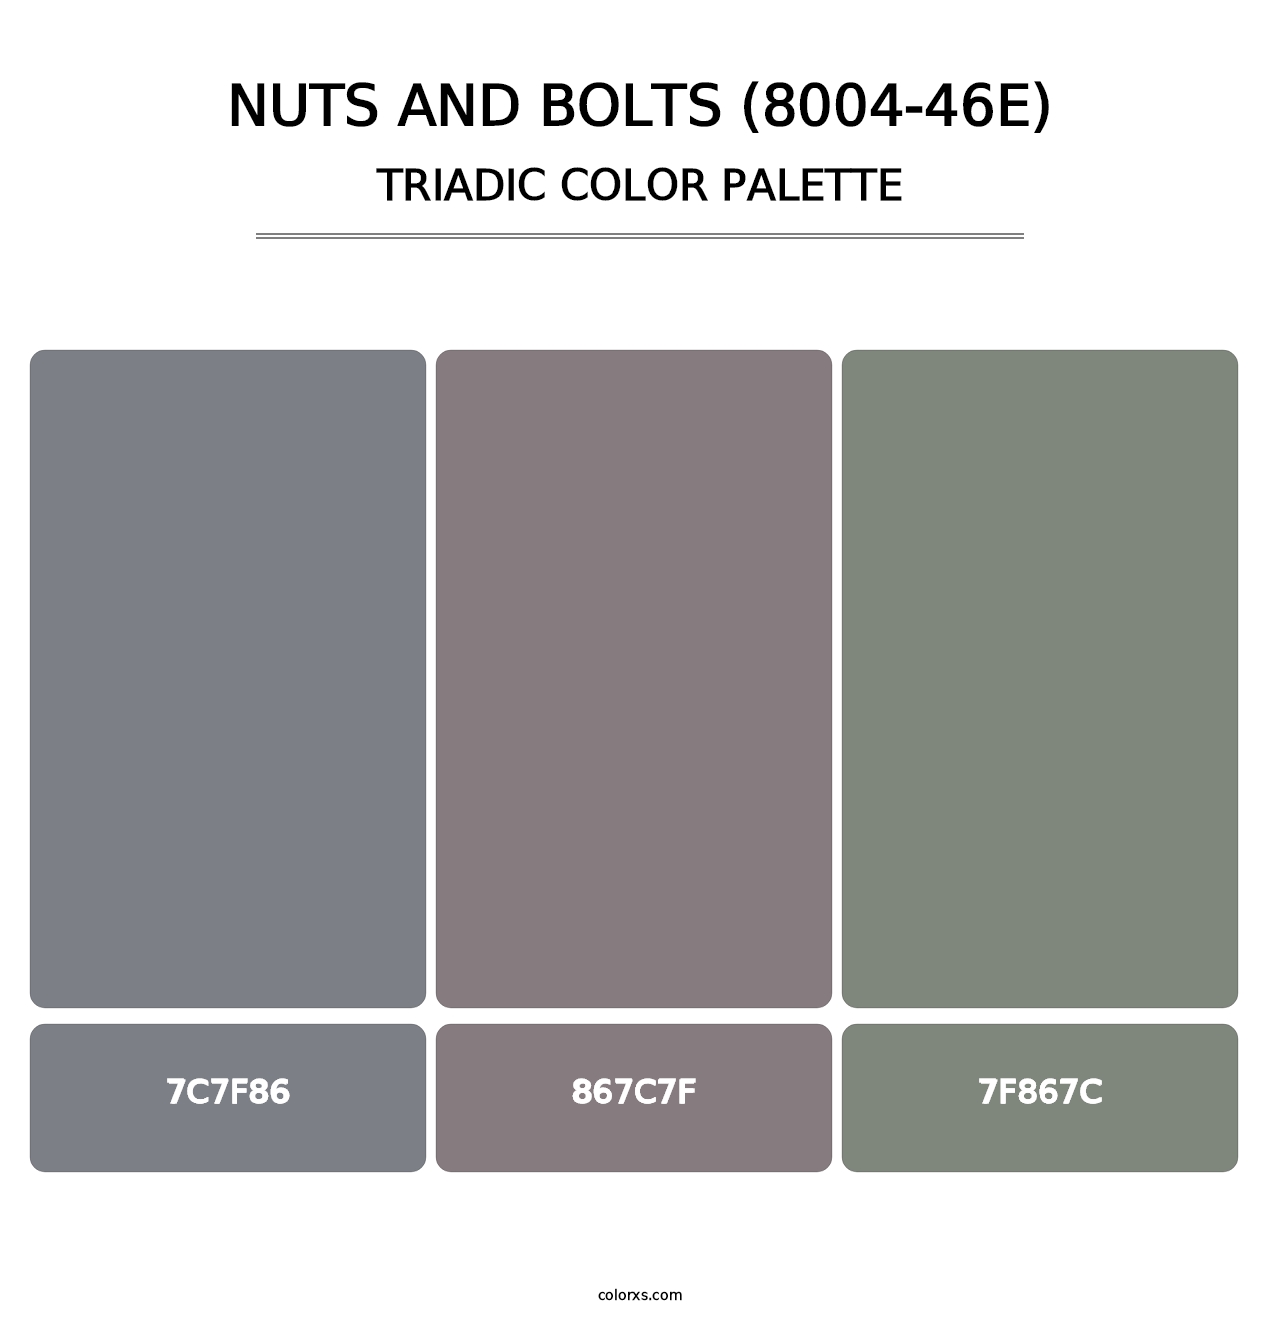 Nuts and Bolts (8004-46E) - Triadic Color Palette